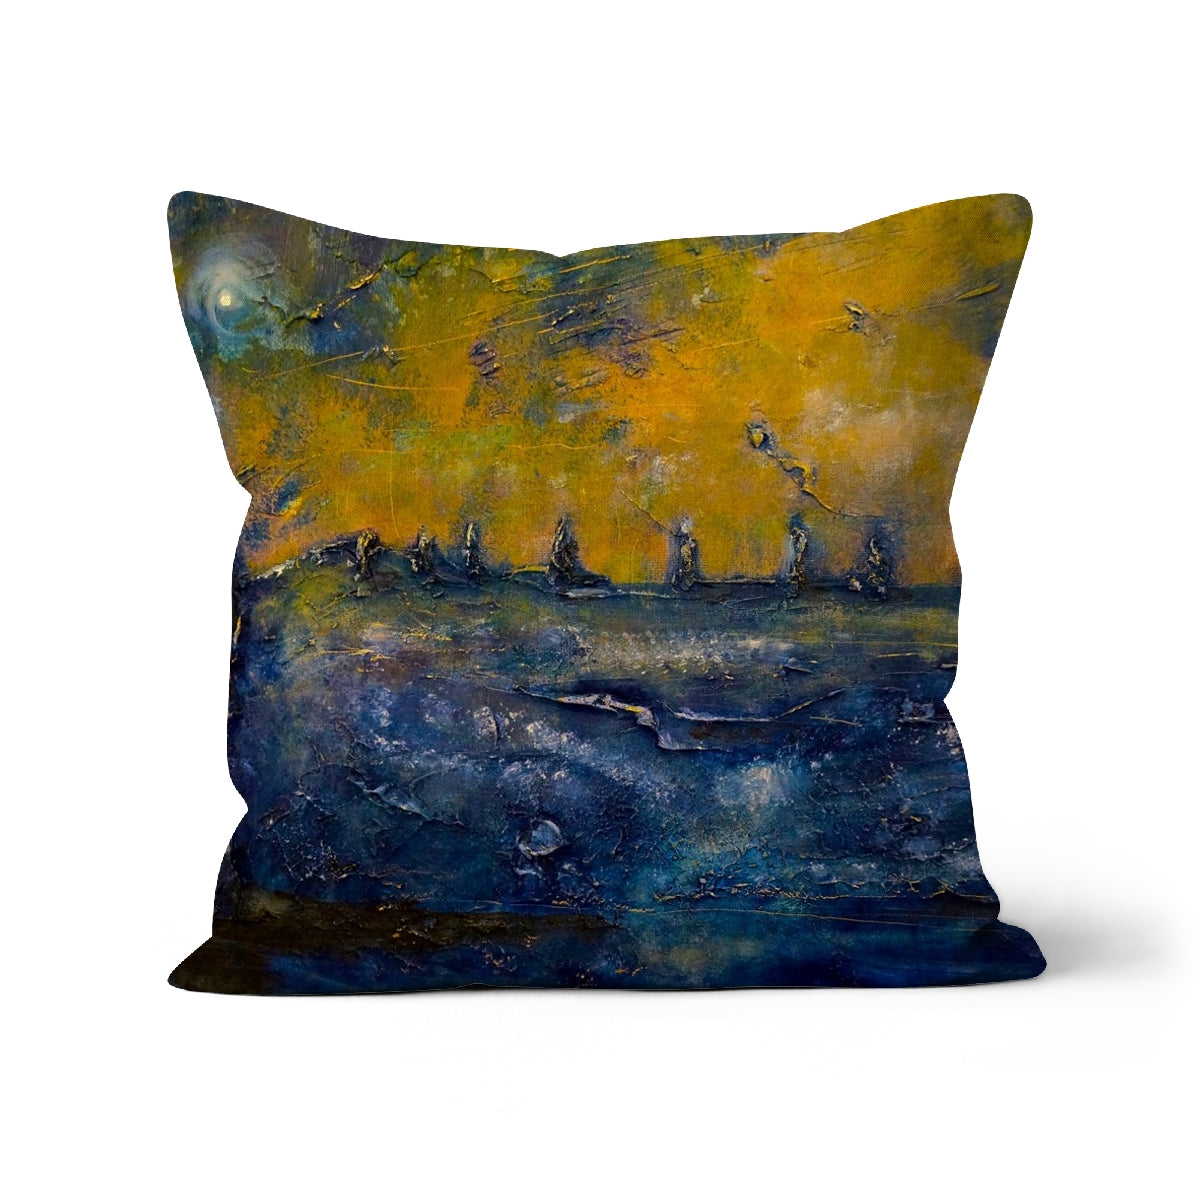 Brodgar Moonlight Orkney Art Gifts Cushion-Cushions-Orkney Art Gallery-Linen-24"x24"-Paintings, Prints, Homeware, Art Gifts From Scotland By Scottish Artist Kevin Hunter